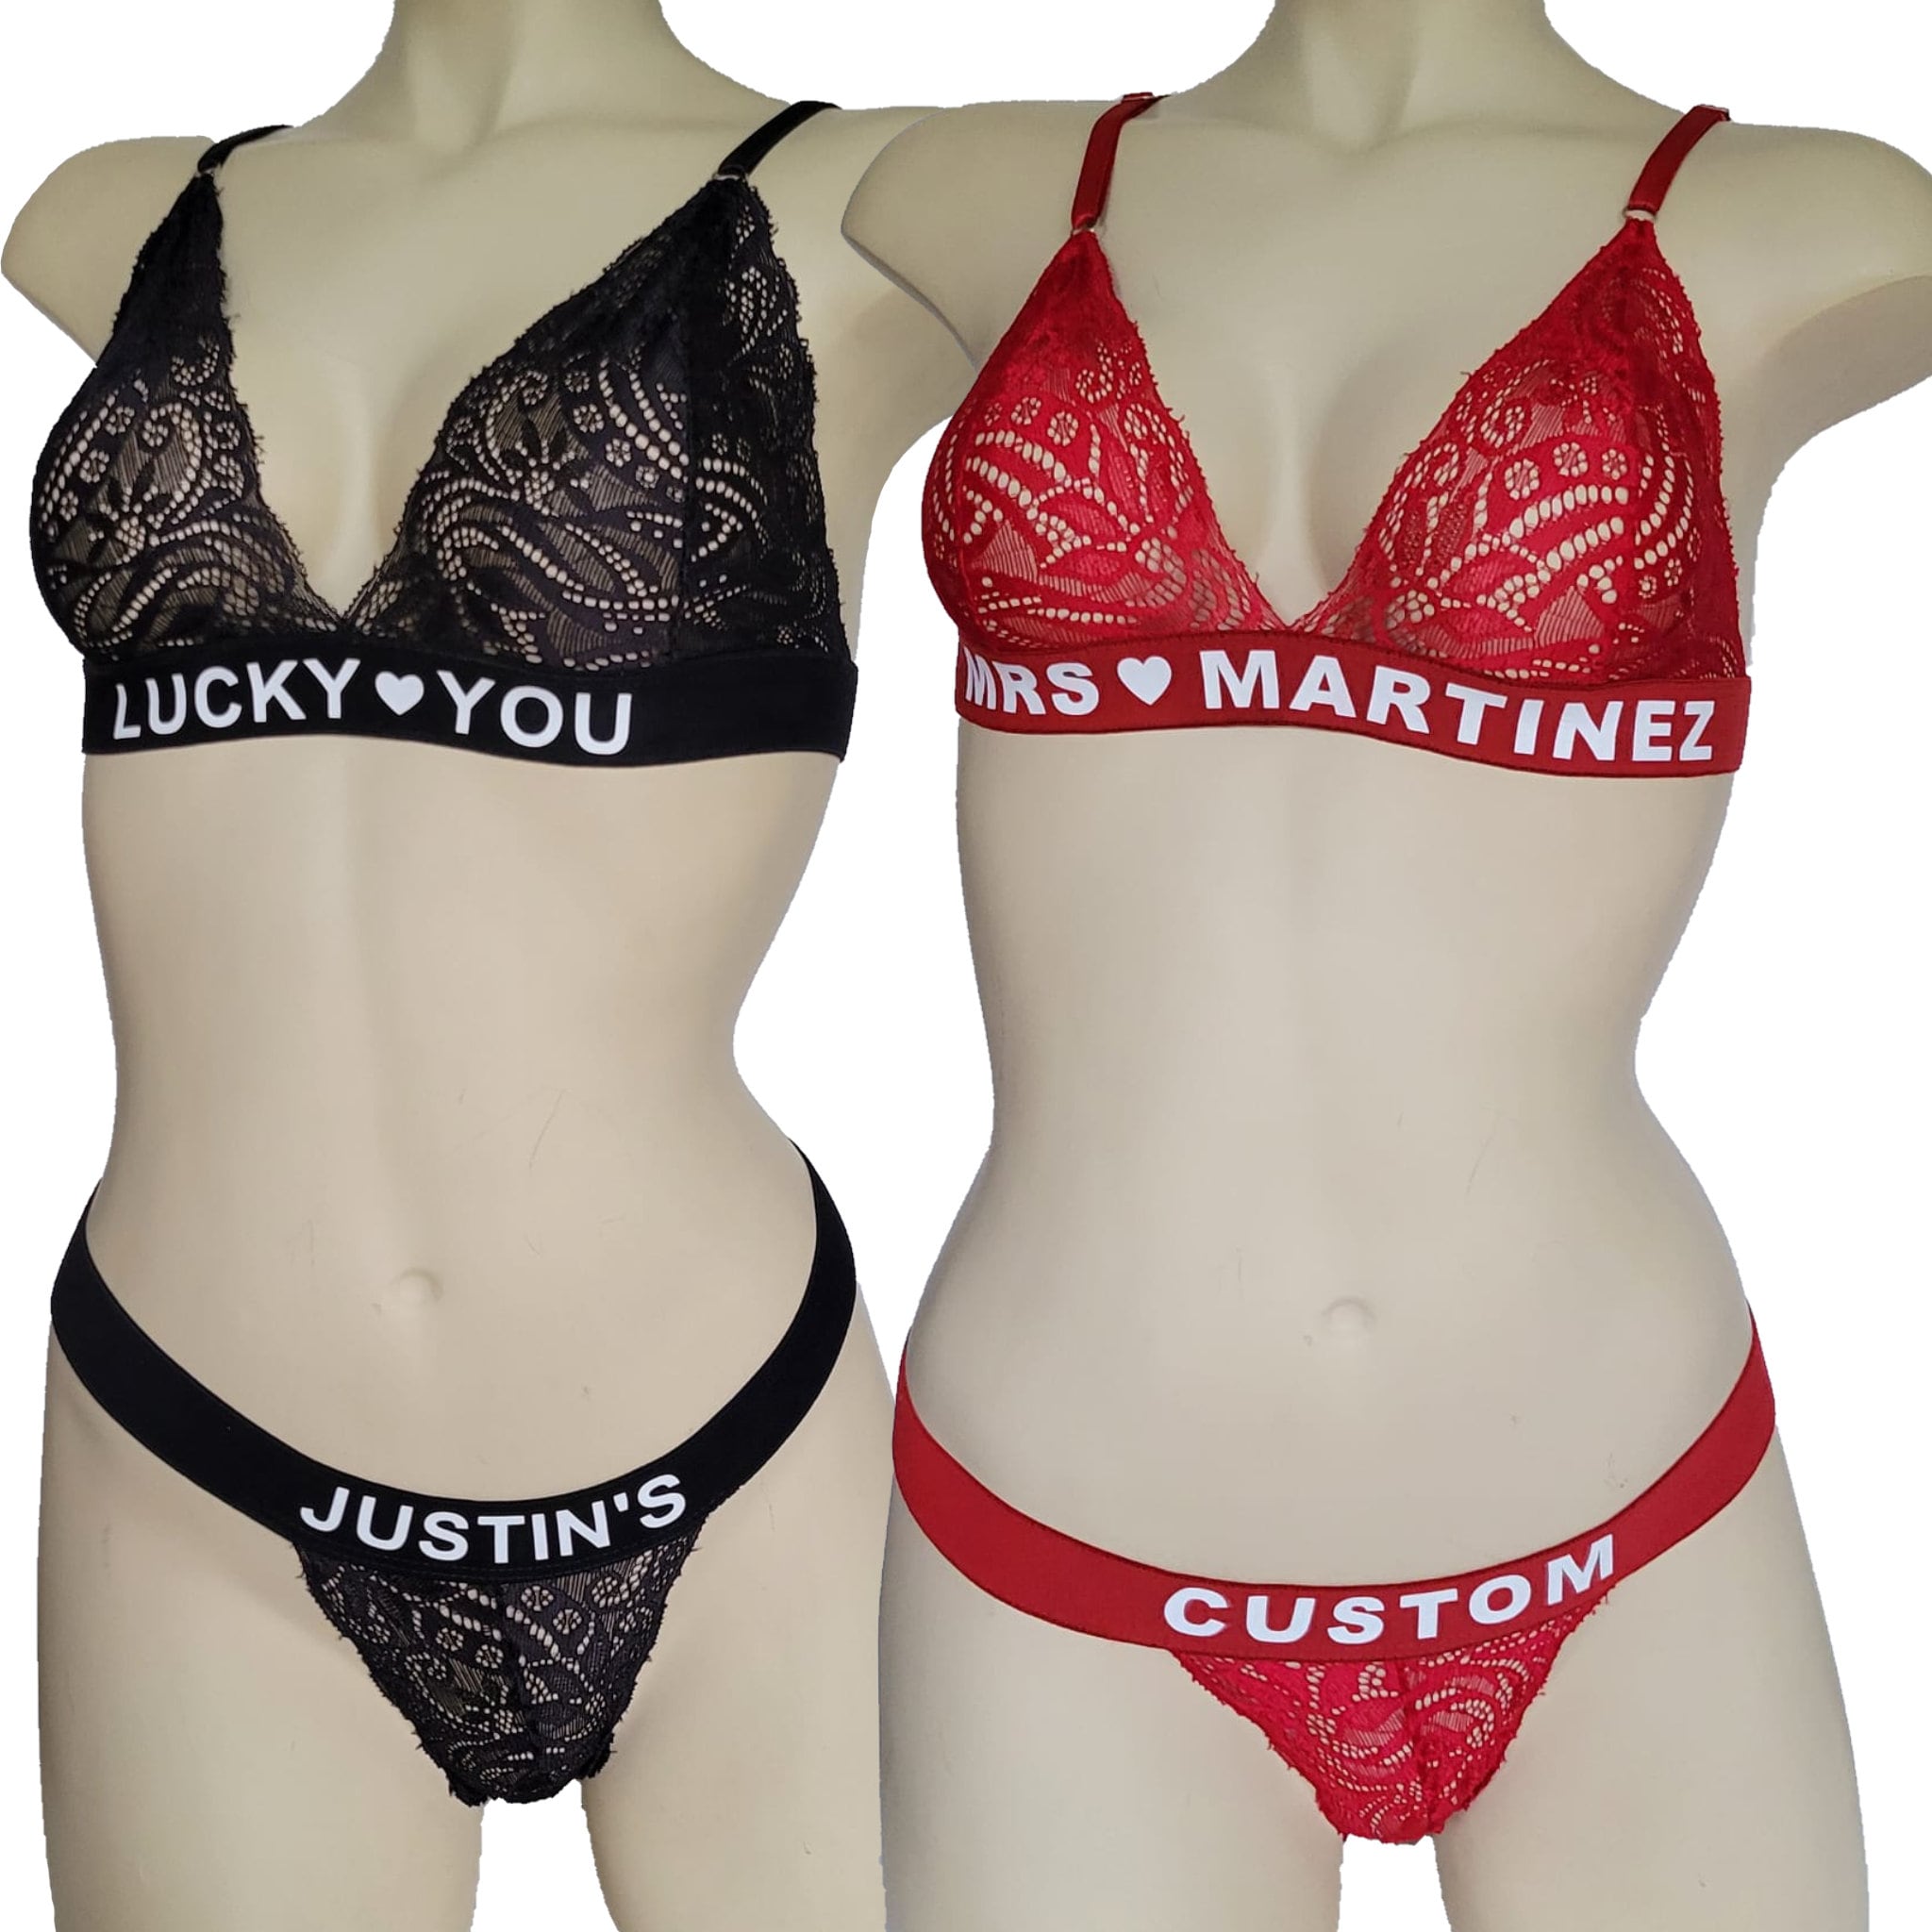 Personalized Lace Lingerie Set - Custom Messages for That Special Someone